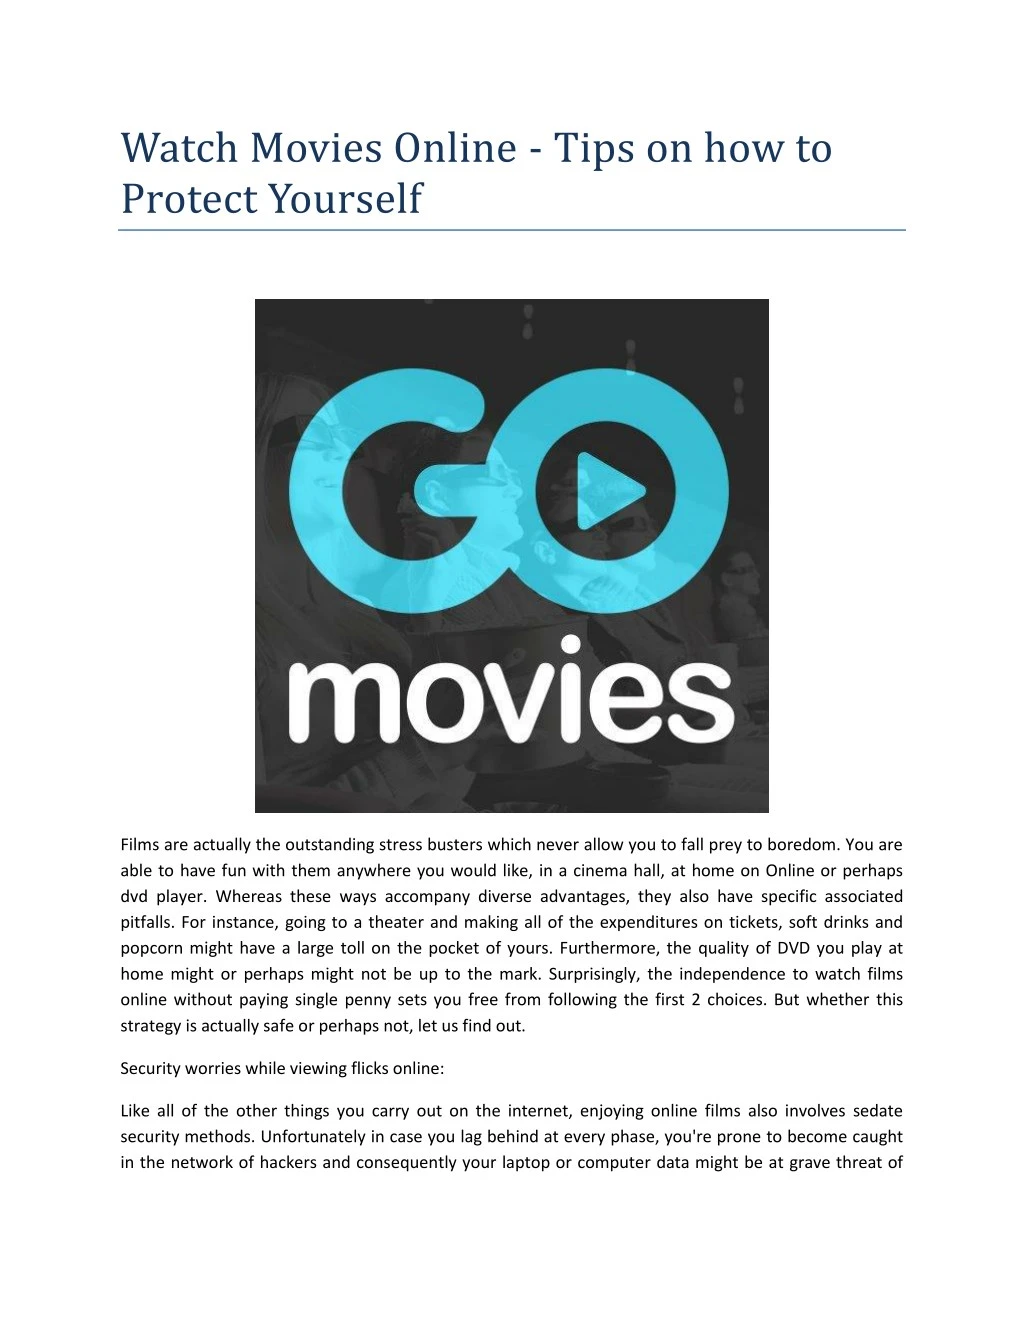 watch movies online tips on how to protect